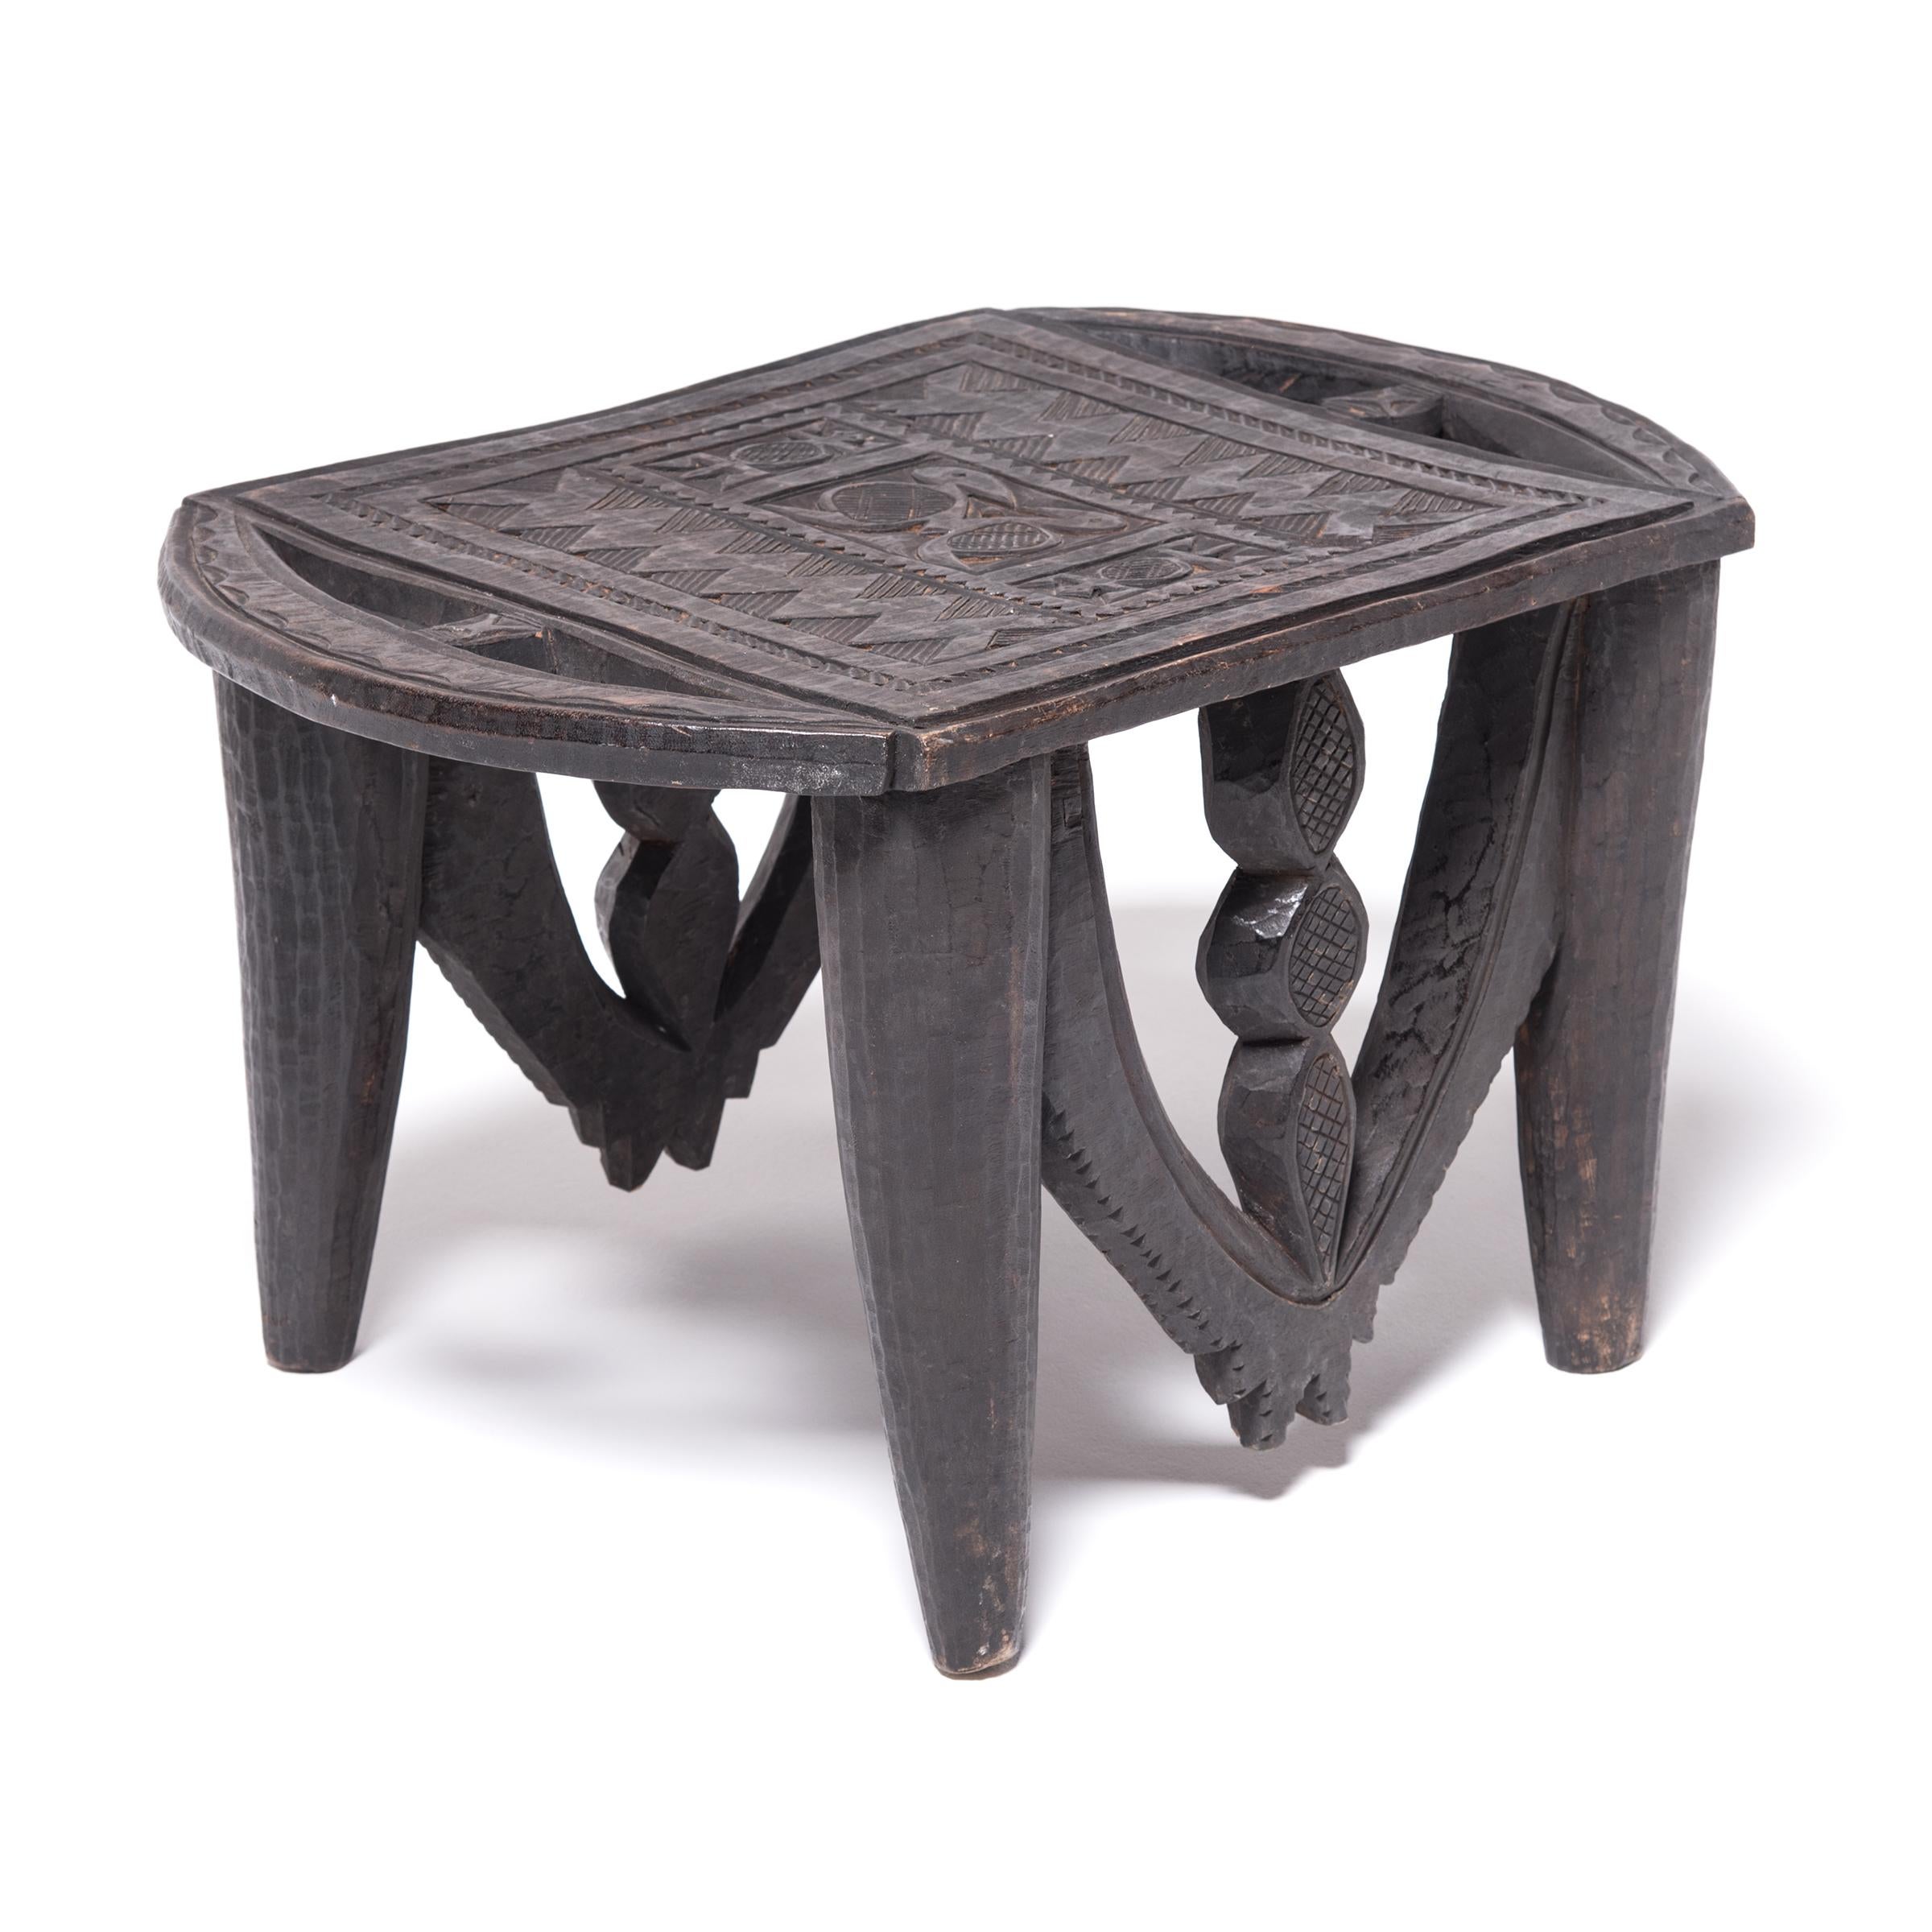 Hand-Carved Early 20th Century Nigerian Nupe Stool with Animal Motifs